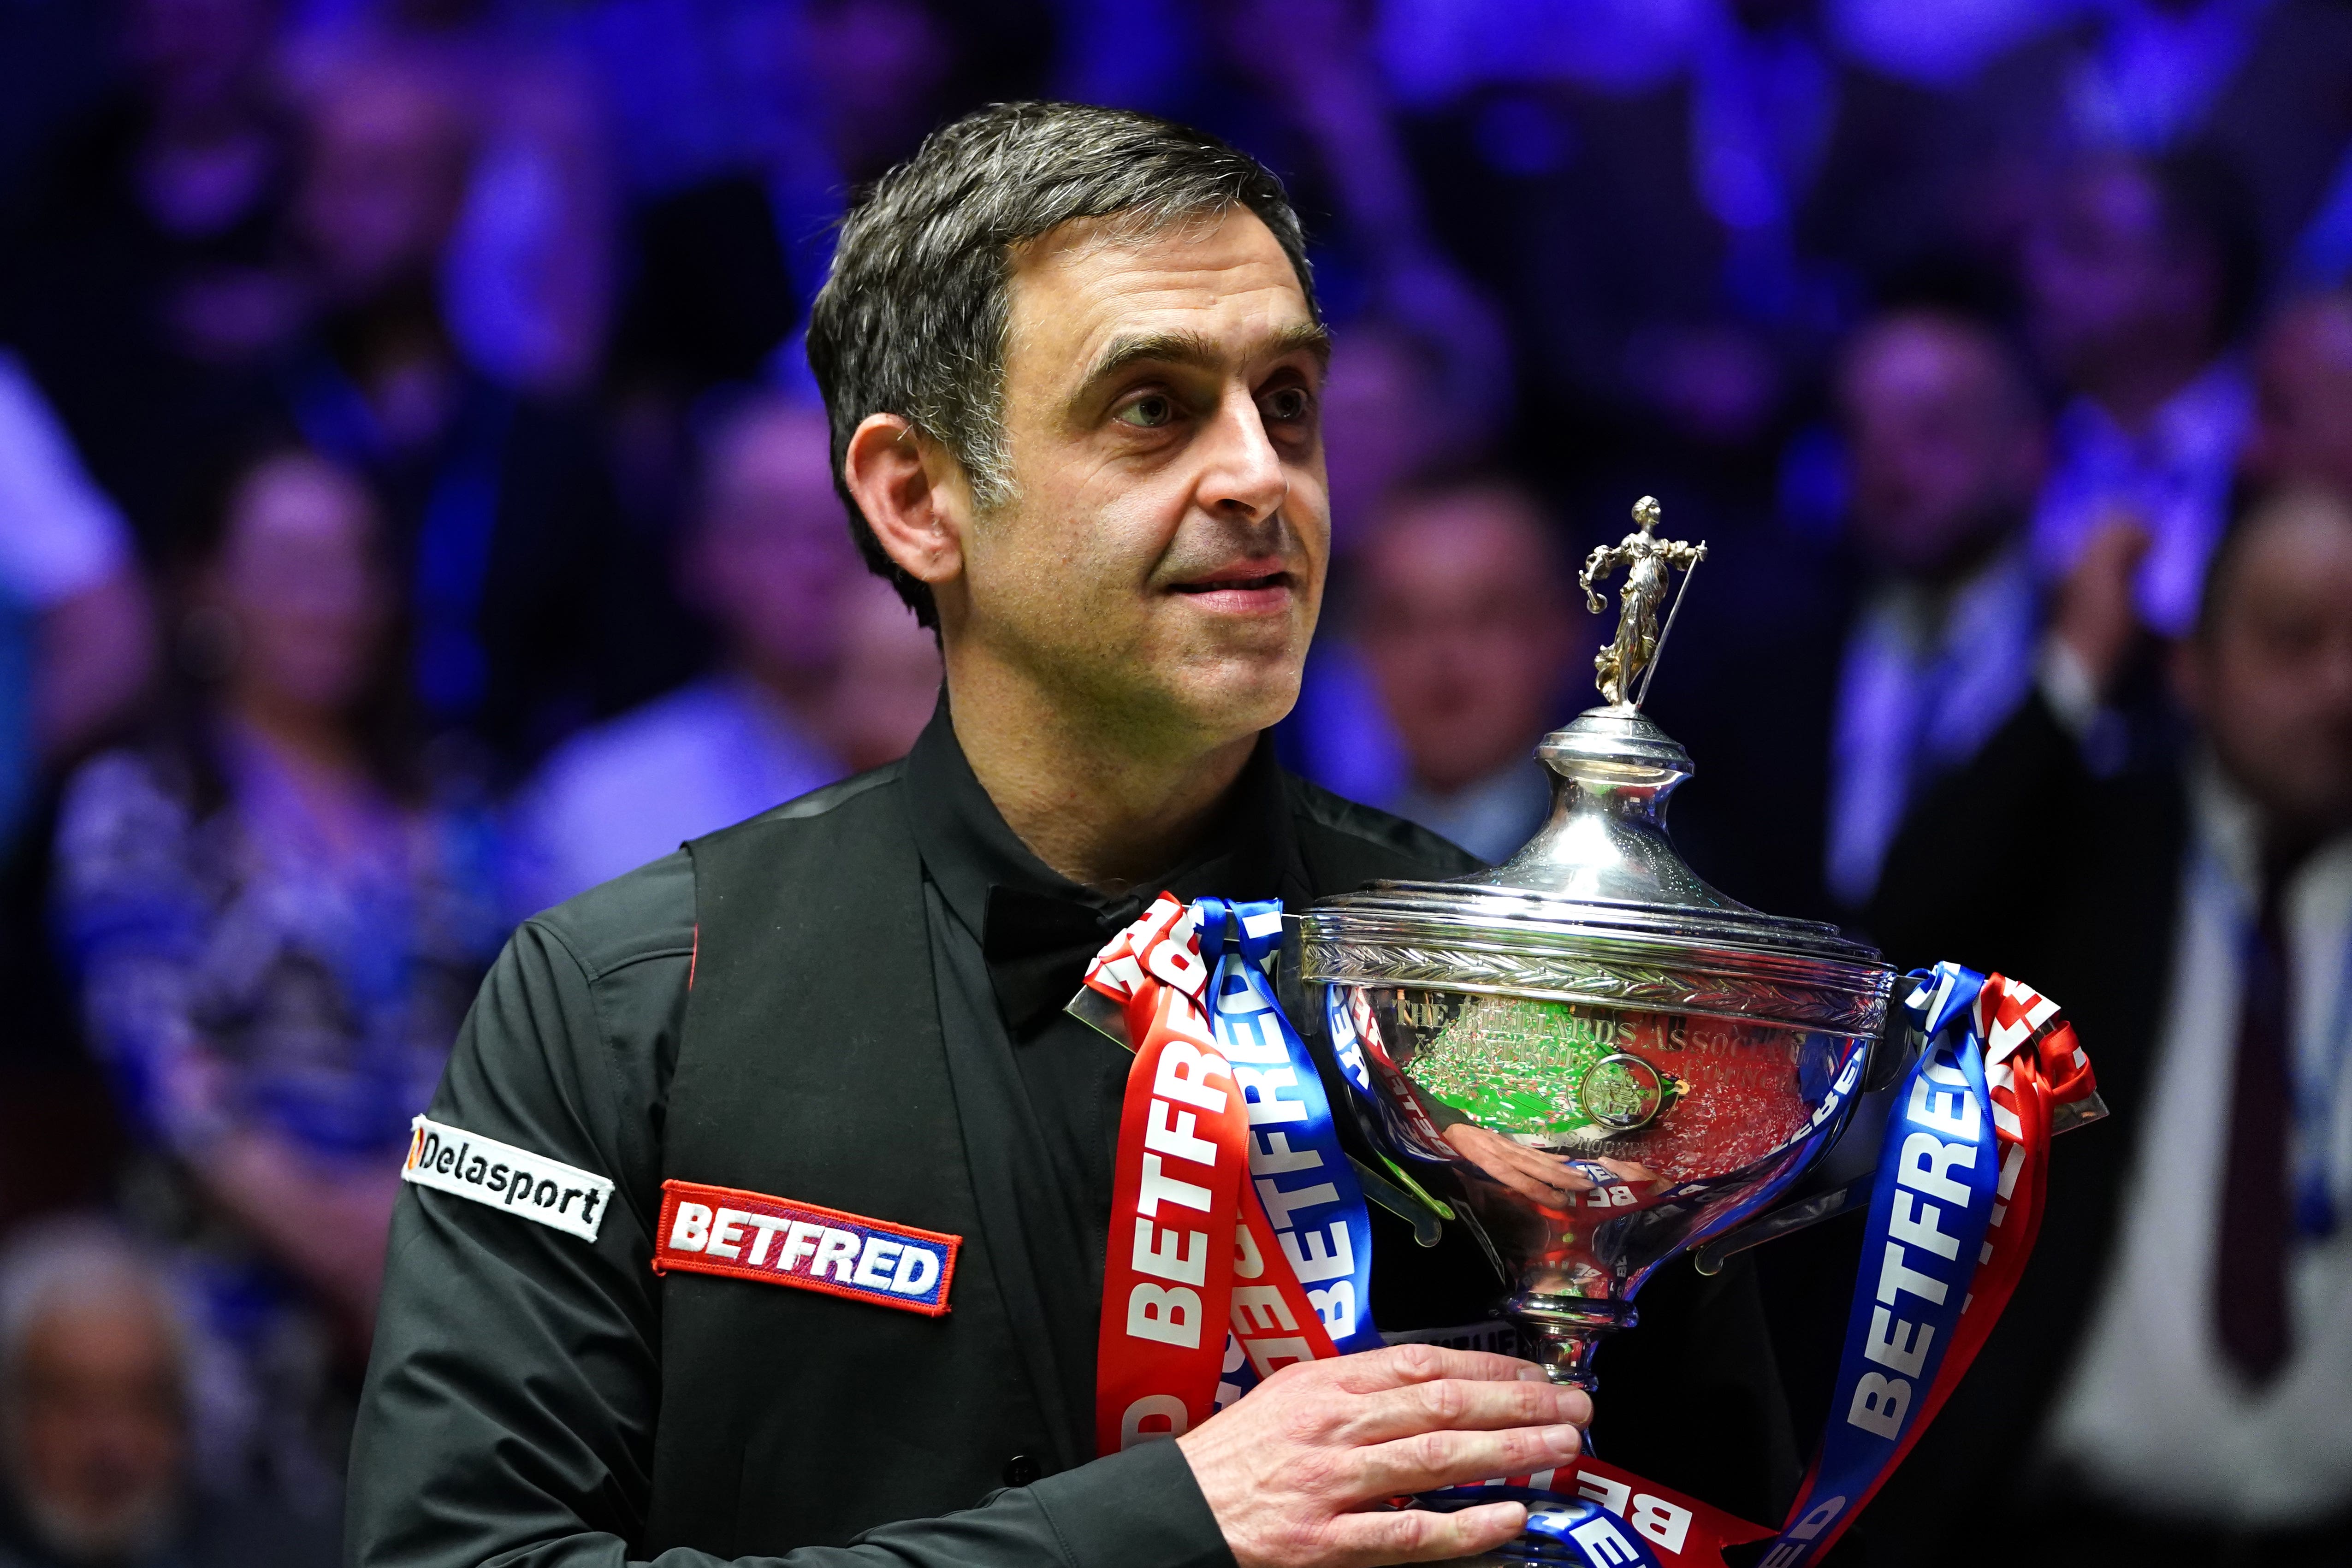 Ronnie O’Sullivan will begin his title defence against Pang Junxu